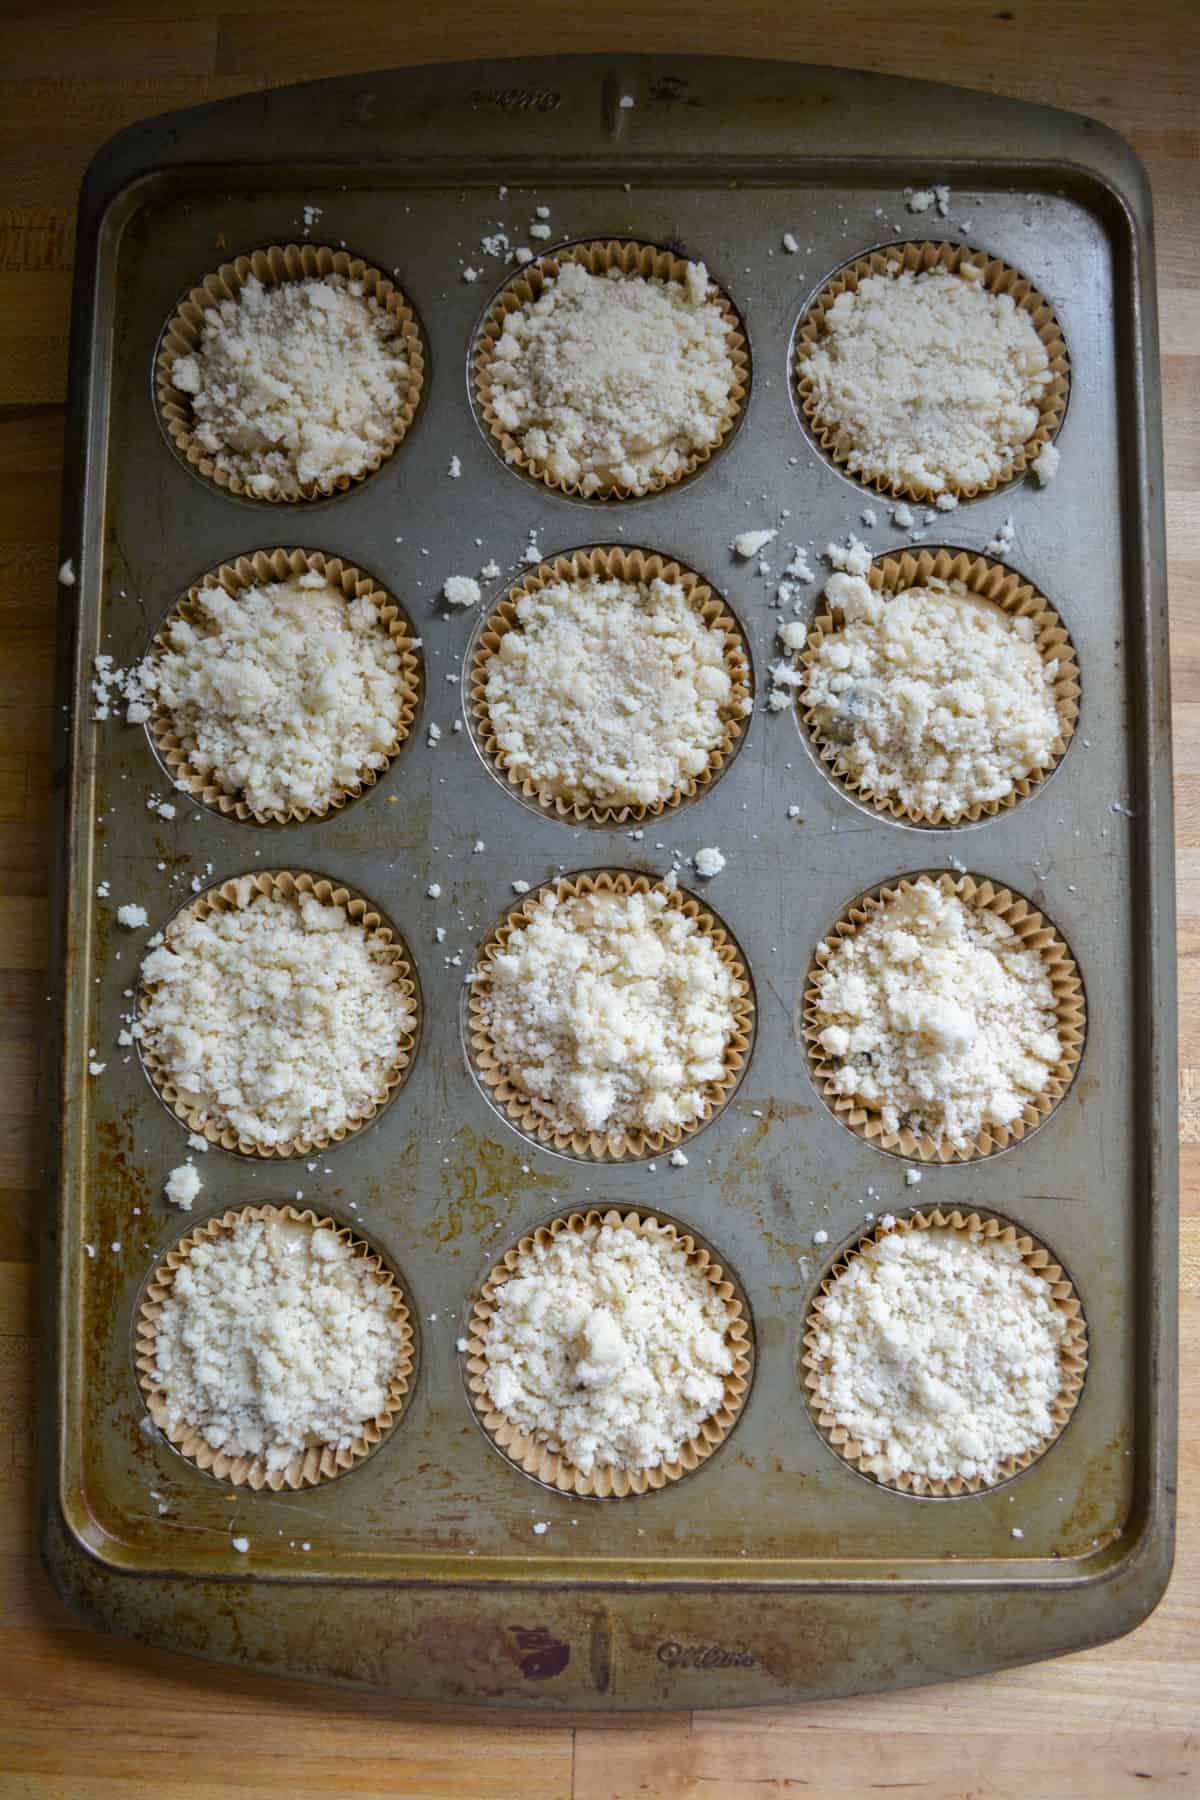 Muffin batter in the muffin tin, topped with crumb topping, ready to bake.